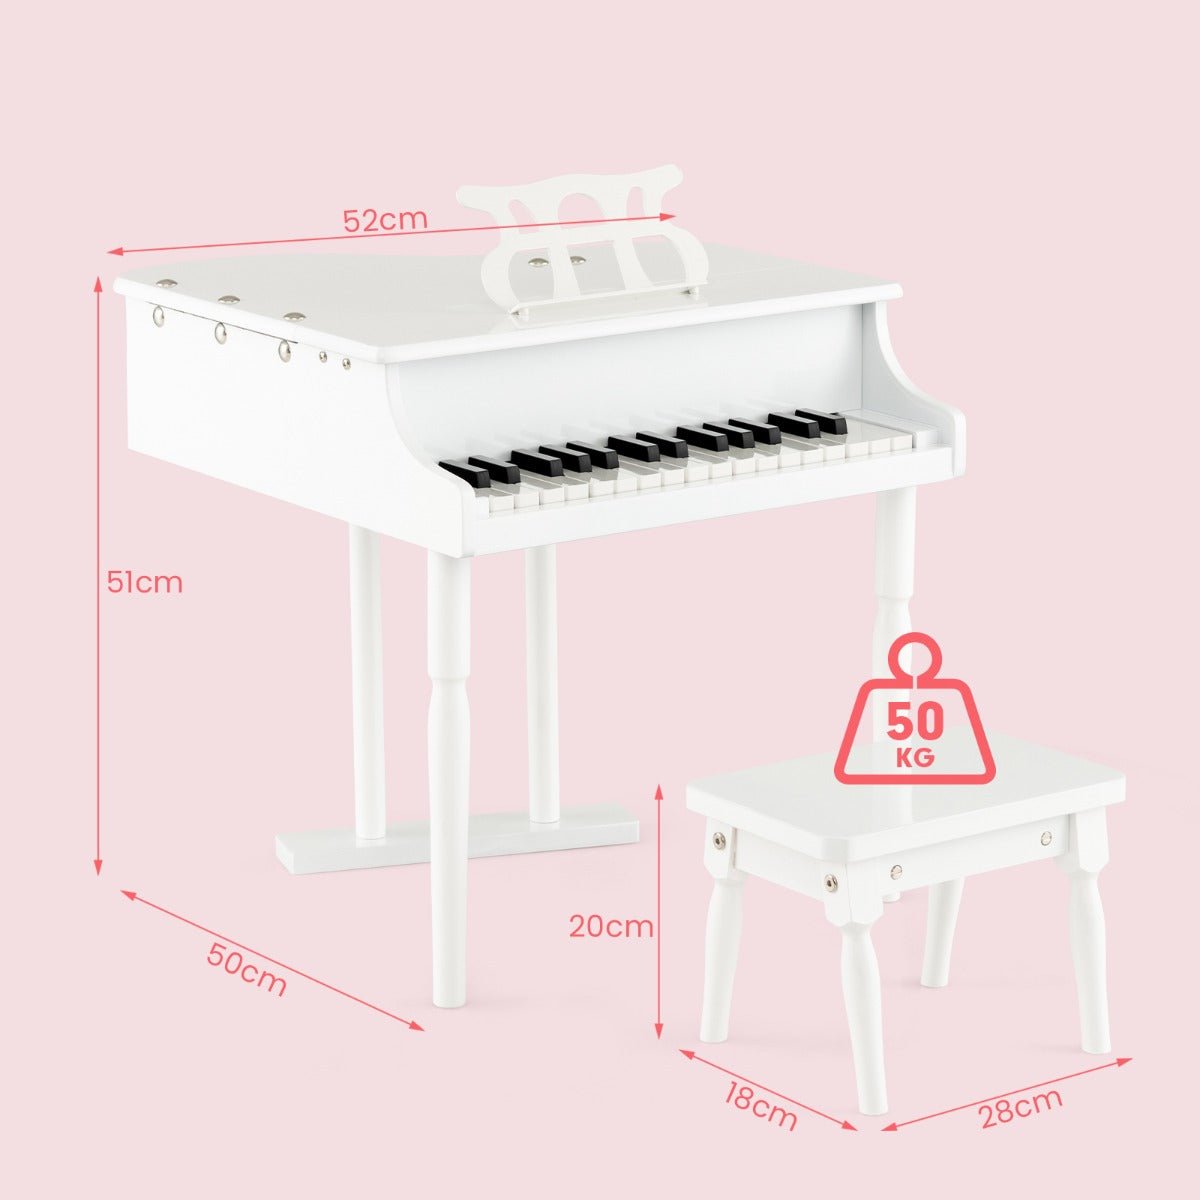 Get the White Piano Keyboard Toy for Aspiring Musicians